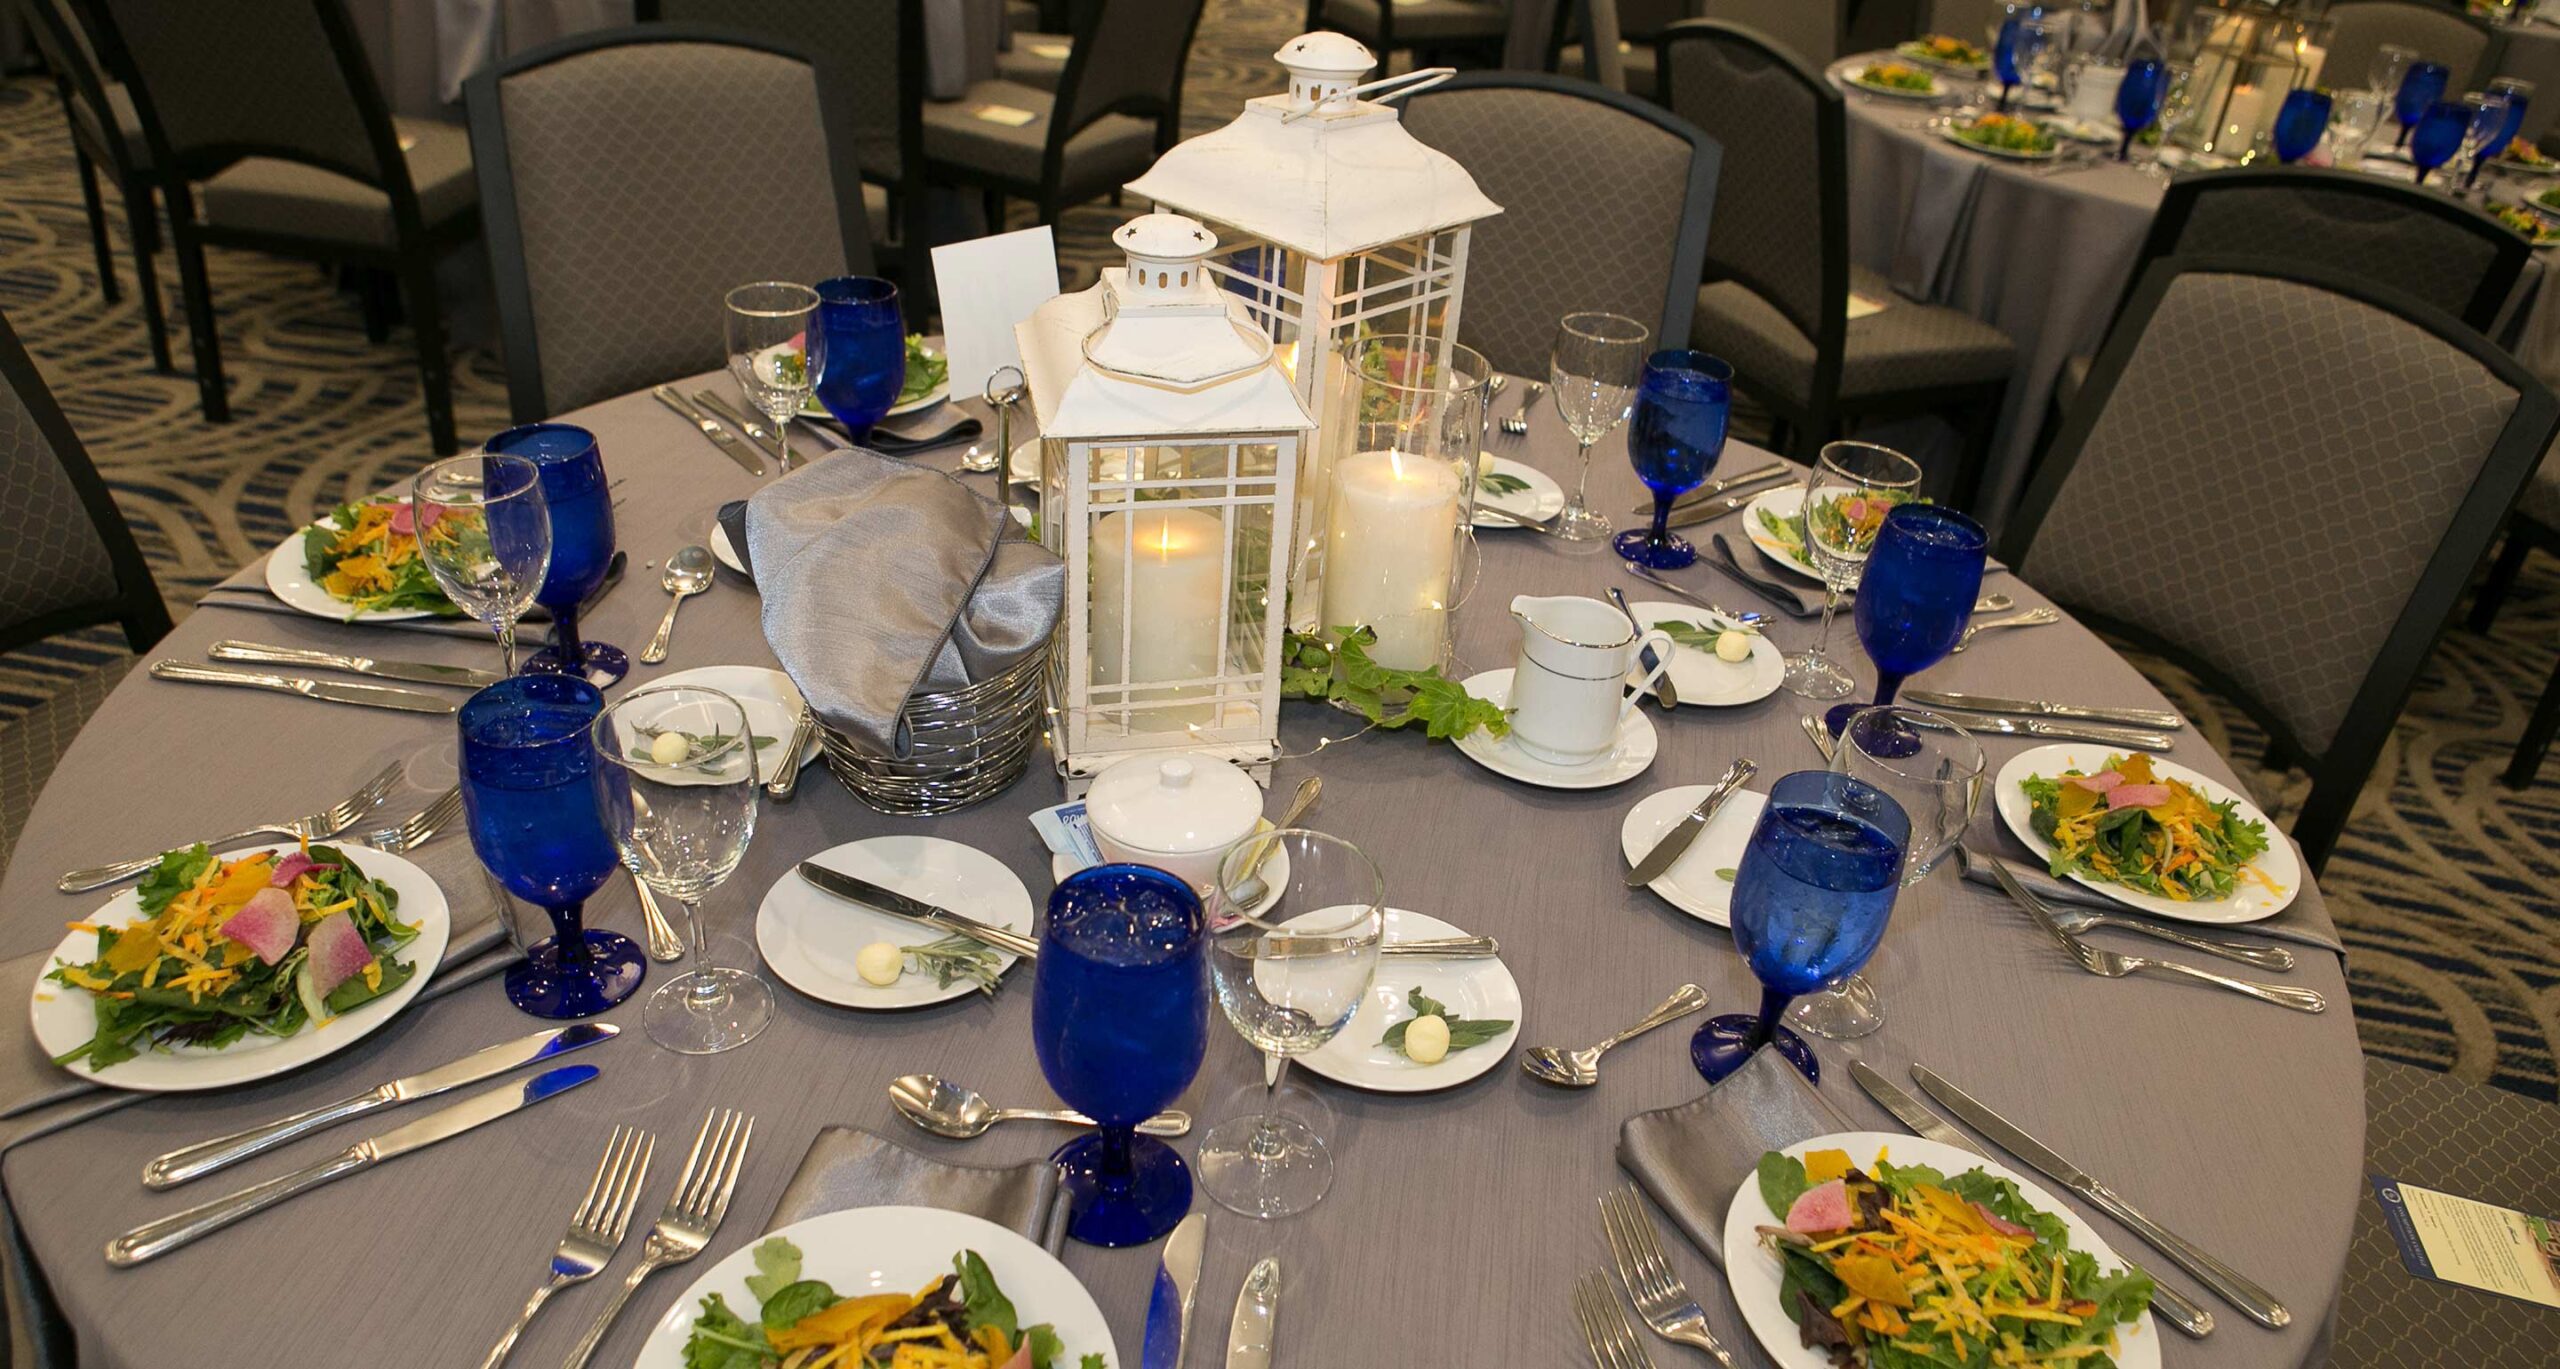 A table set for dinner in the 350-seat ballroom of the Tsotsis Family Academic Center on the campus of Assumption College.